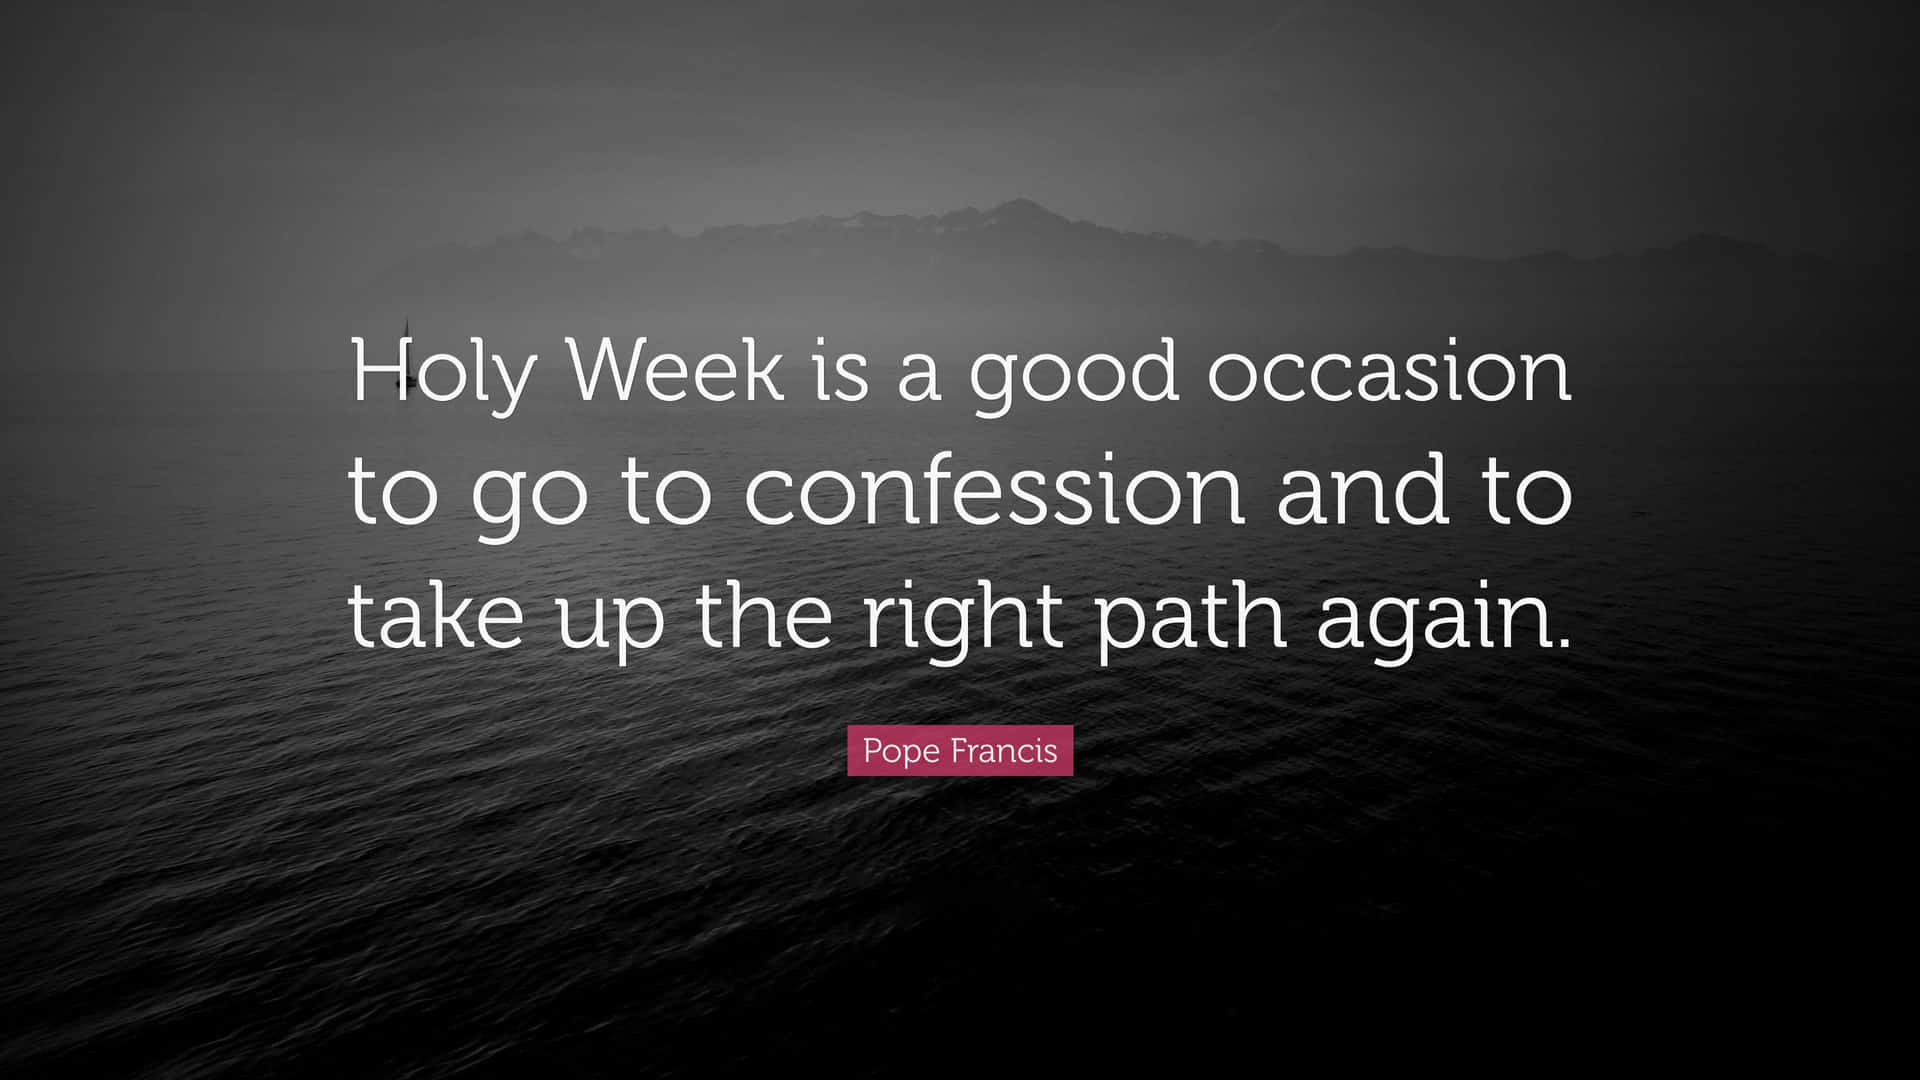 “Celebrating Special Journey of the Holy Week” Wallpaper